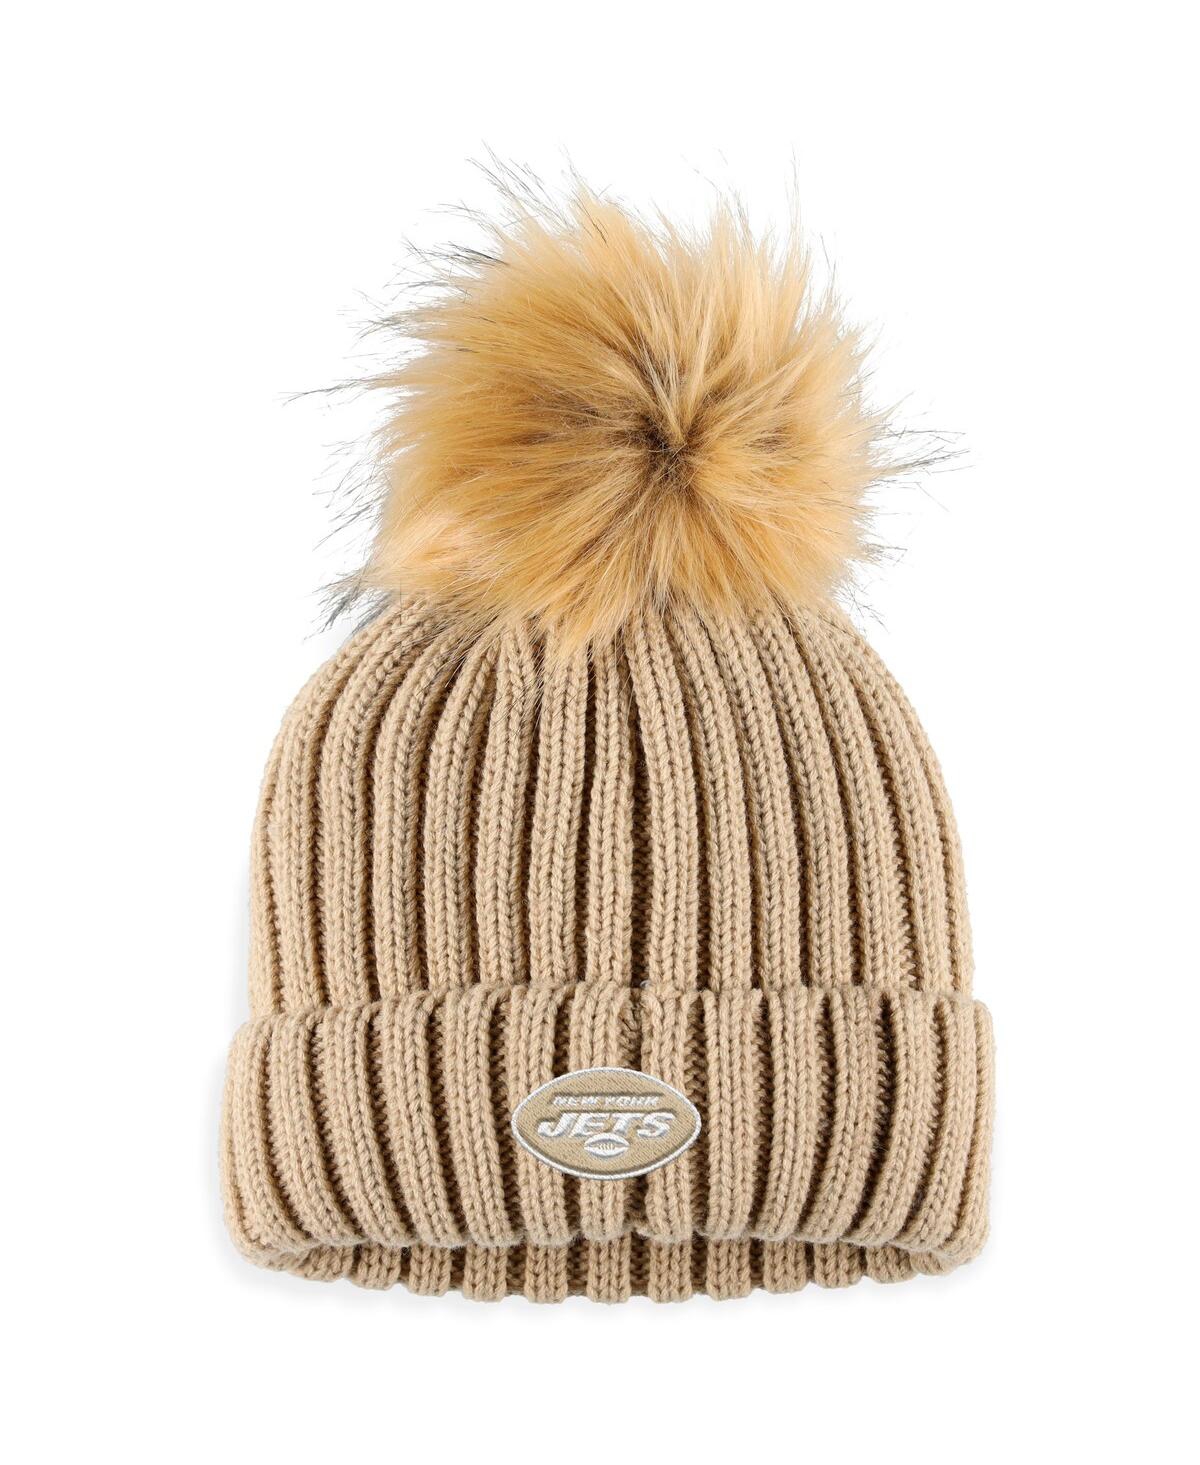 Wear By Erin Andrews Women's  Natural New York Jets Neutral Cuffed Knit Hat With Pom